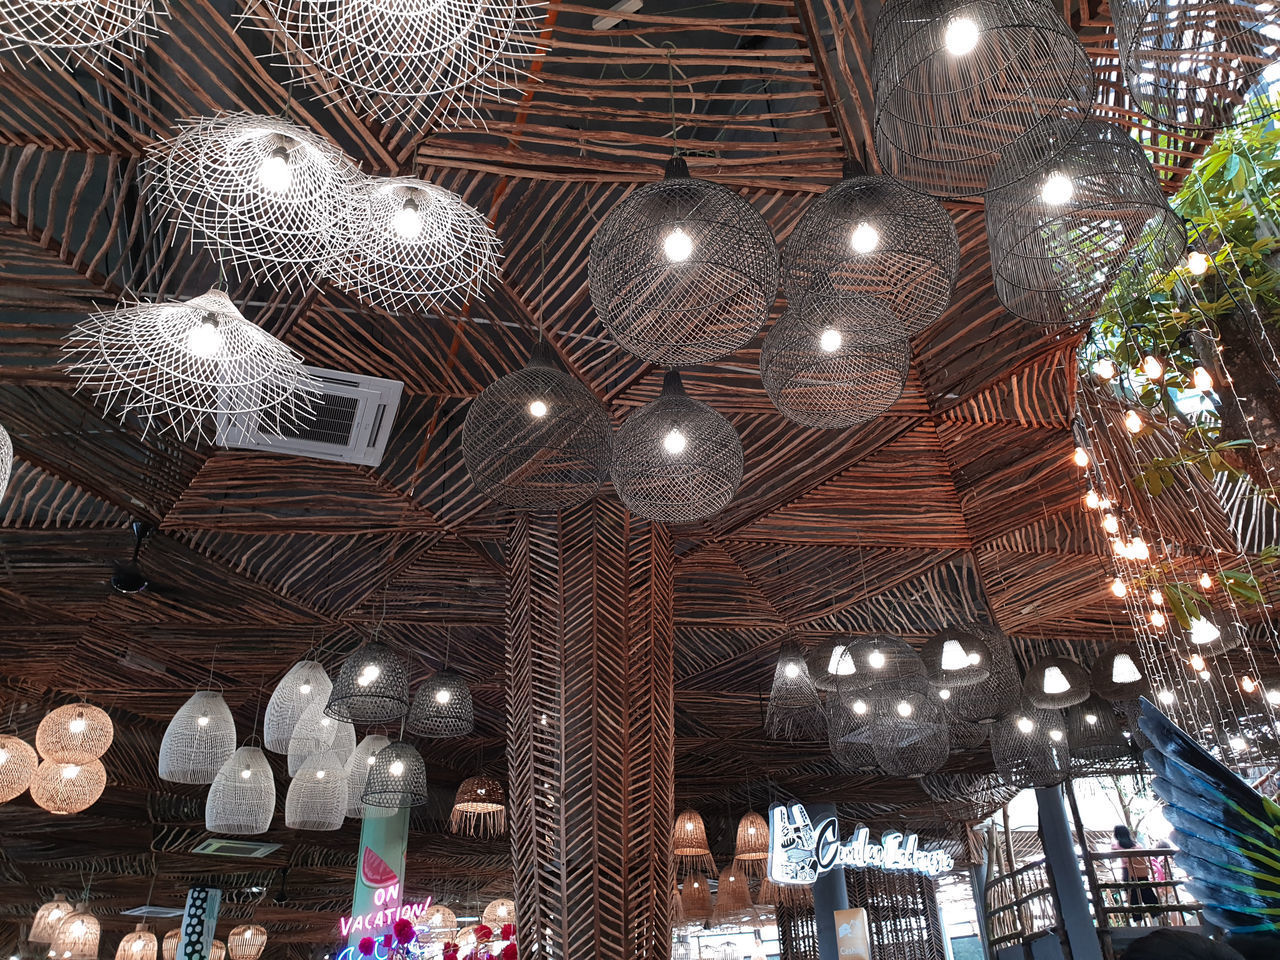 LOW ANGLE VIEW OF ILLUMINATED PENDANT LIGHT HANGING ON CEILING